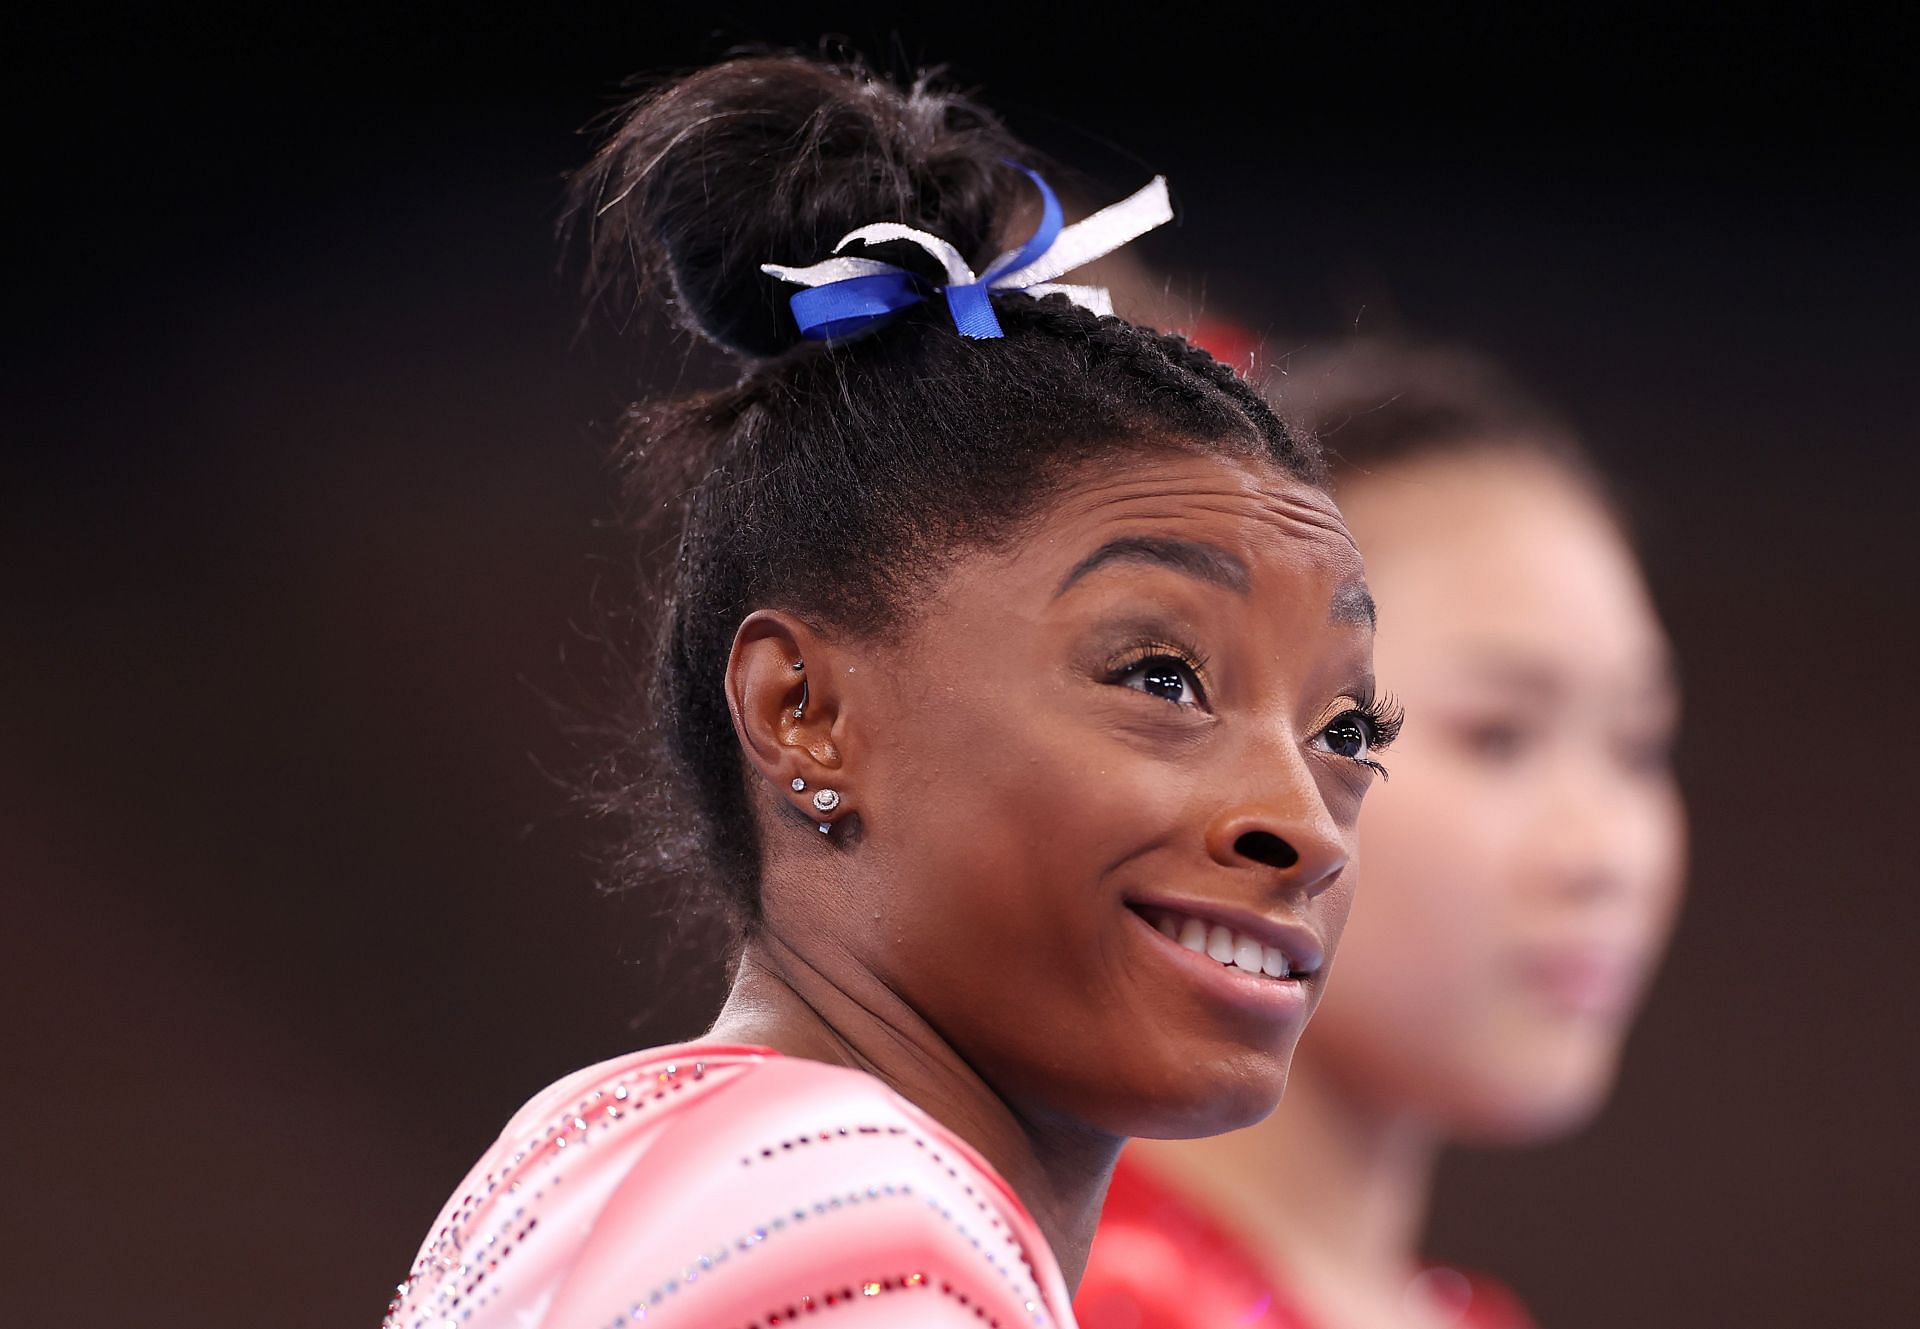 Simone Biles at the Tokyo Olympics, 2021 (Photo by Laurence Griffiths/Getty Images)